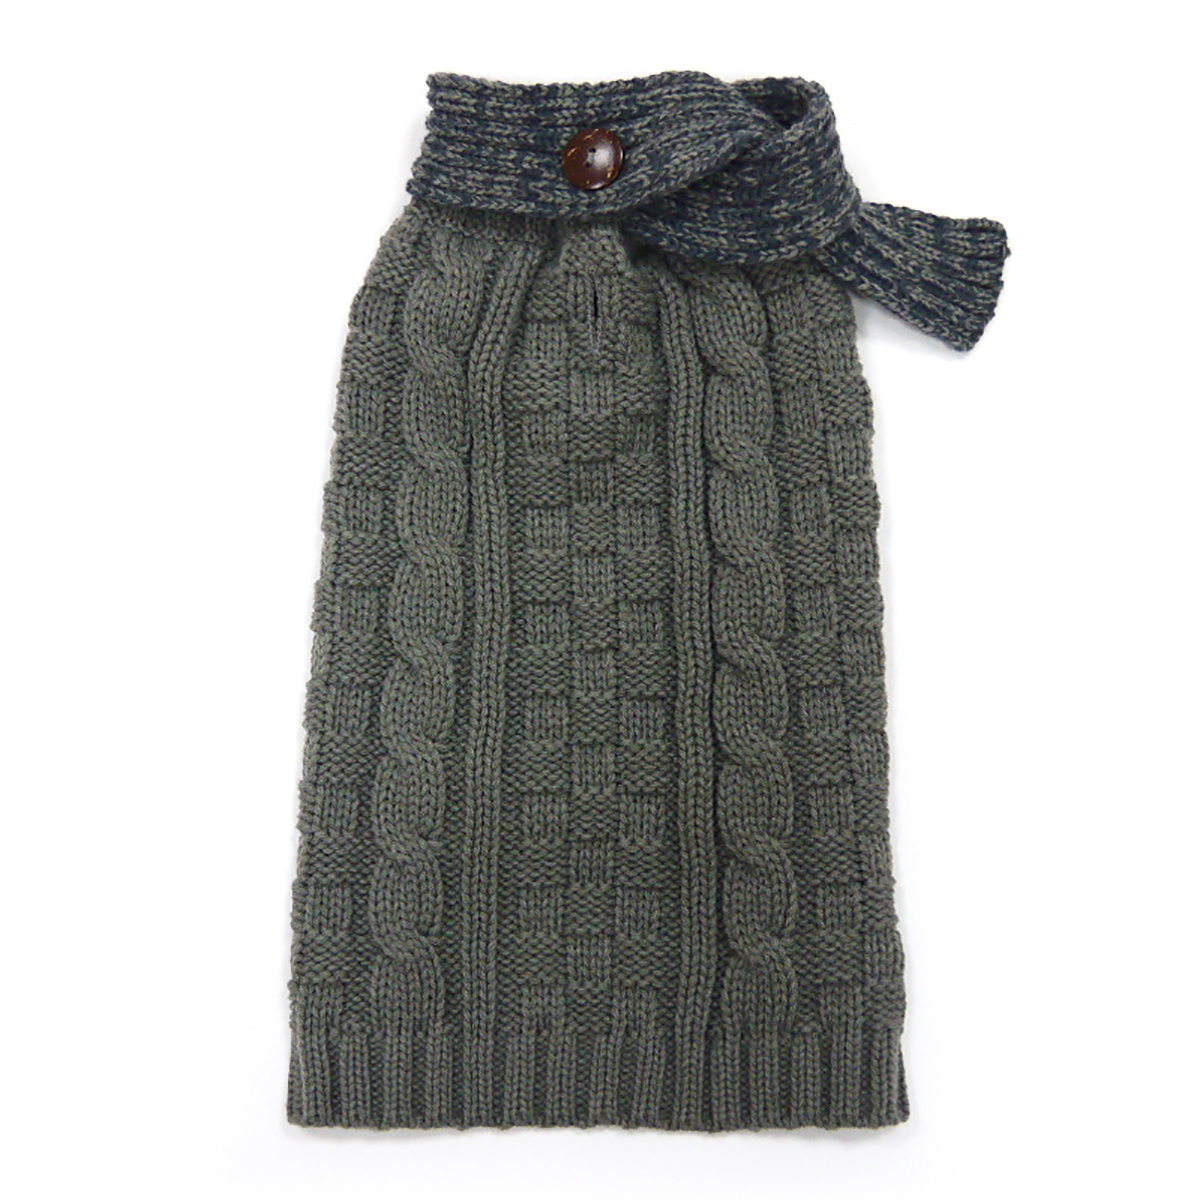 Urban Cable Scarf Dog Sweater by Dogo - Gray